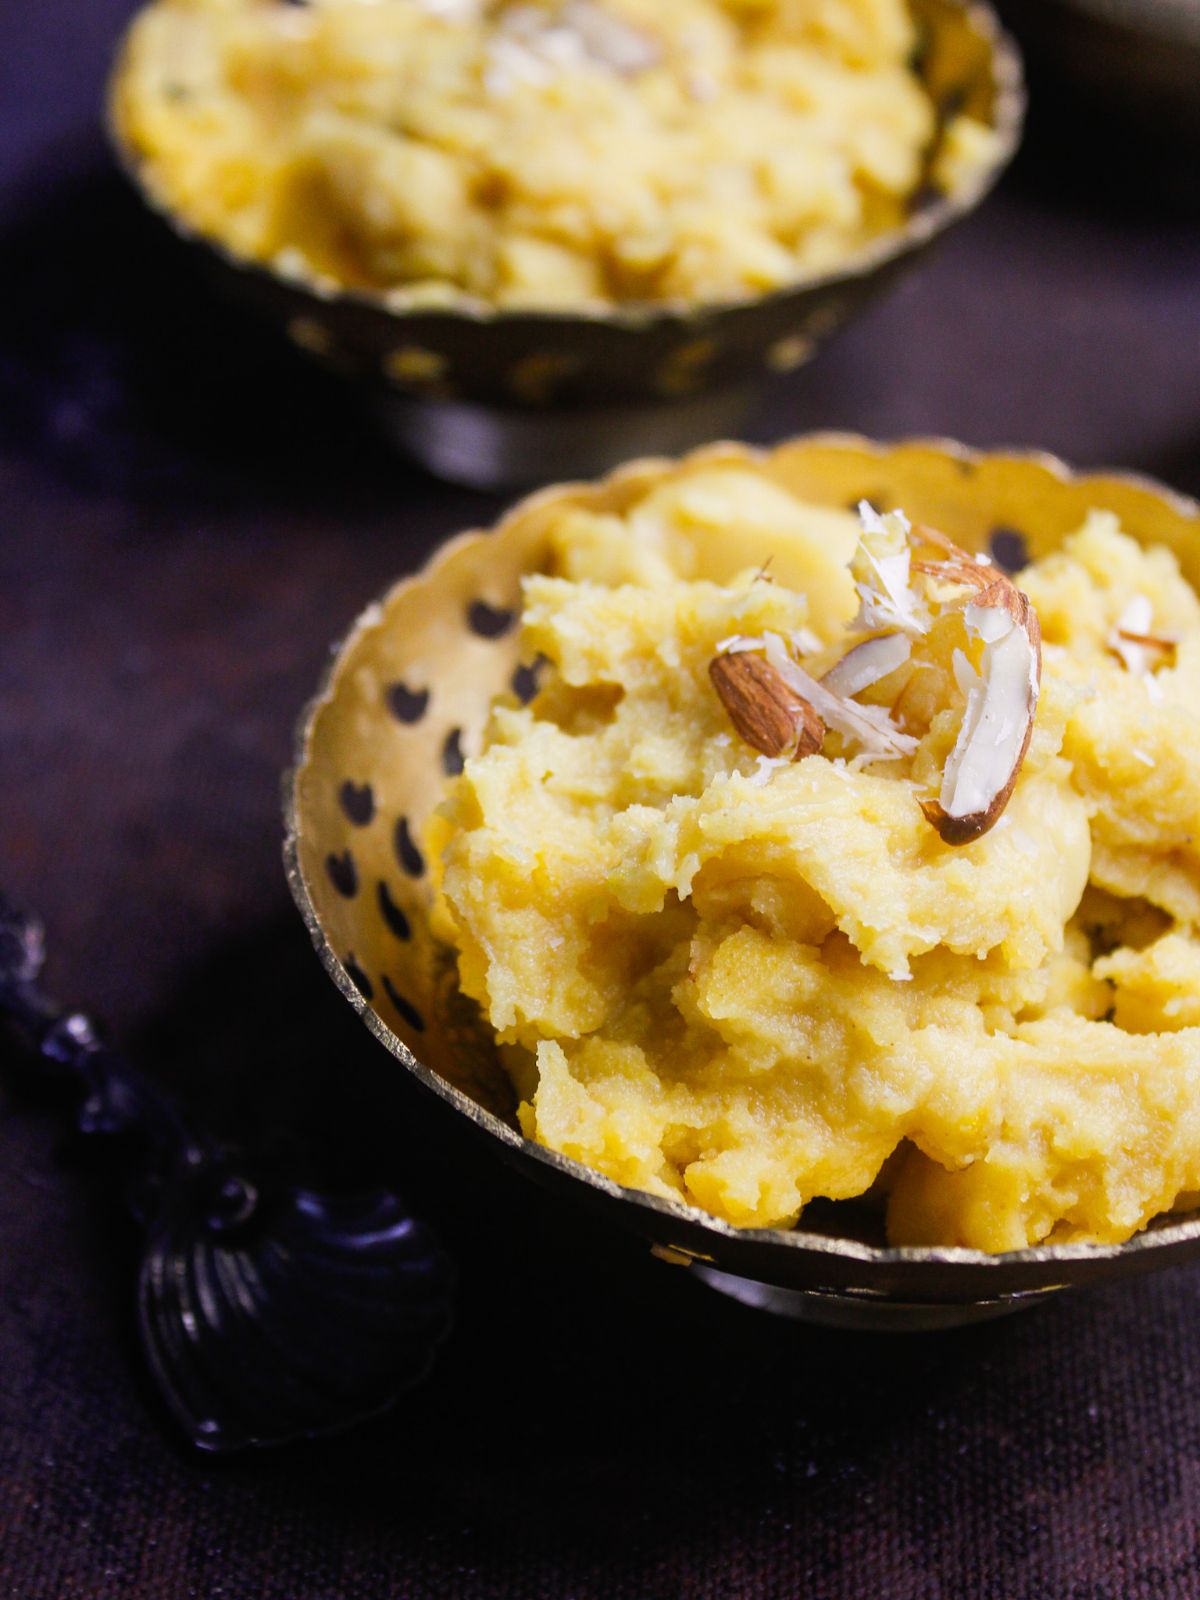 Sweet Besan Halwa served in a golden bowl